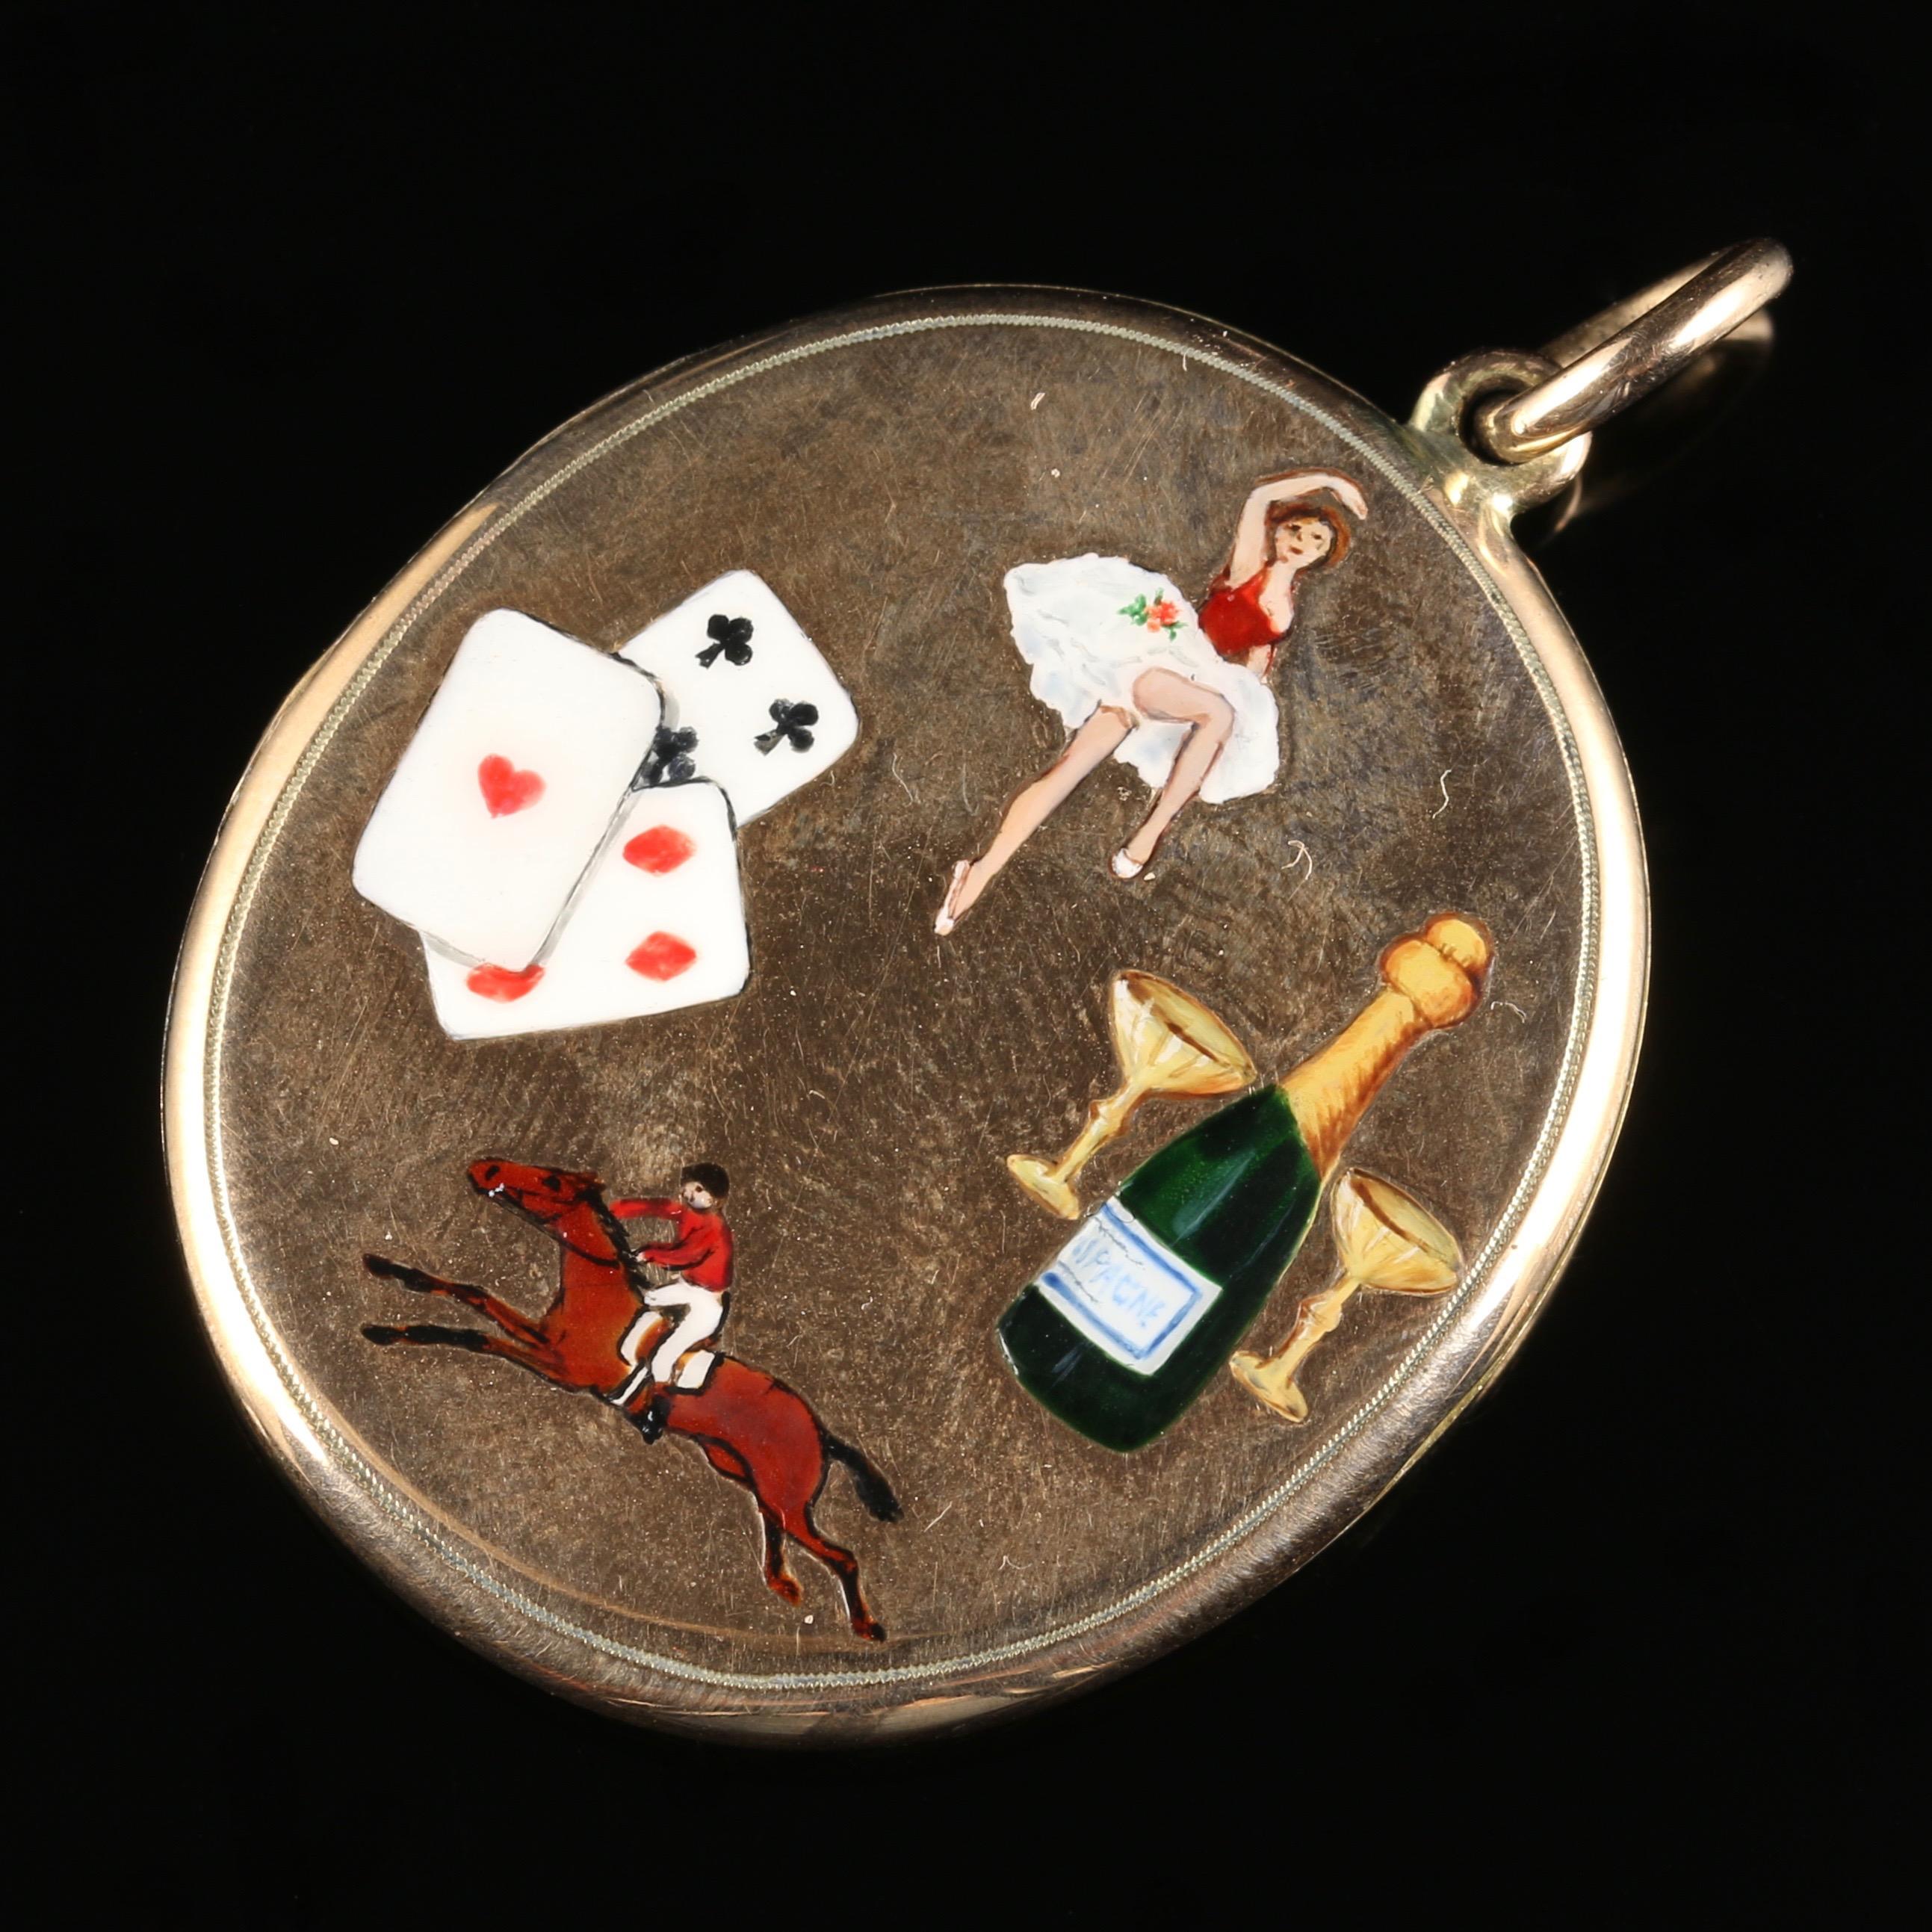 For more details please click continue reading down below...

This is one of the most collectable enamel Gold lockets you will ever see!

Circa 1900

This beautifully crafted 10ct Gold locket depicts in a fanciful way the vices of men Playing cards,